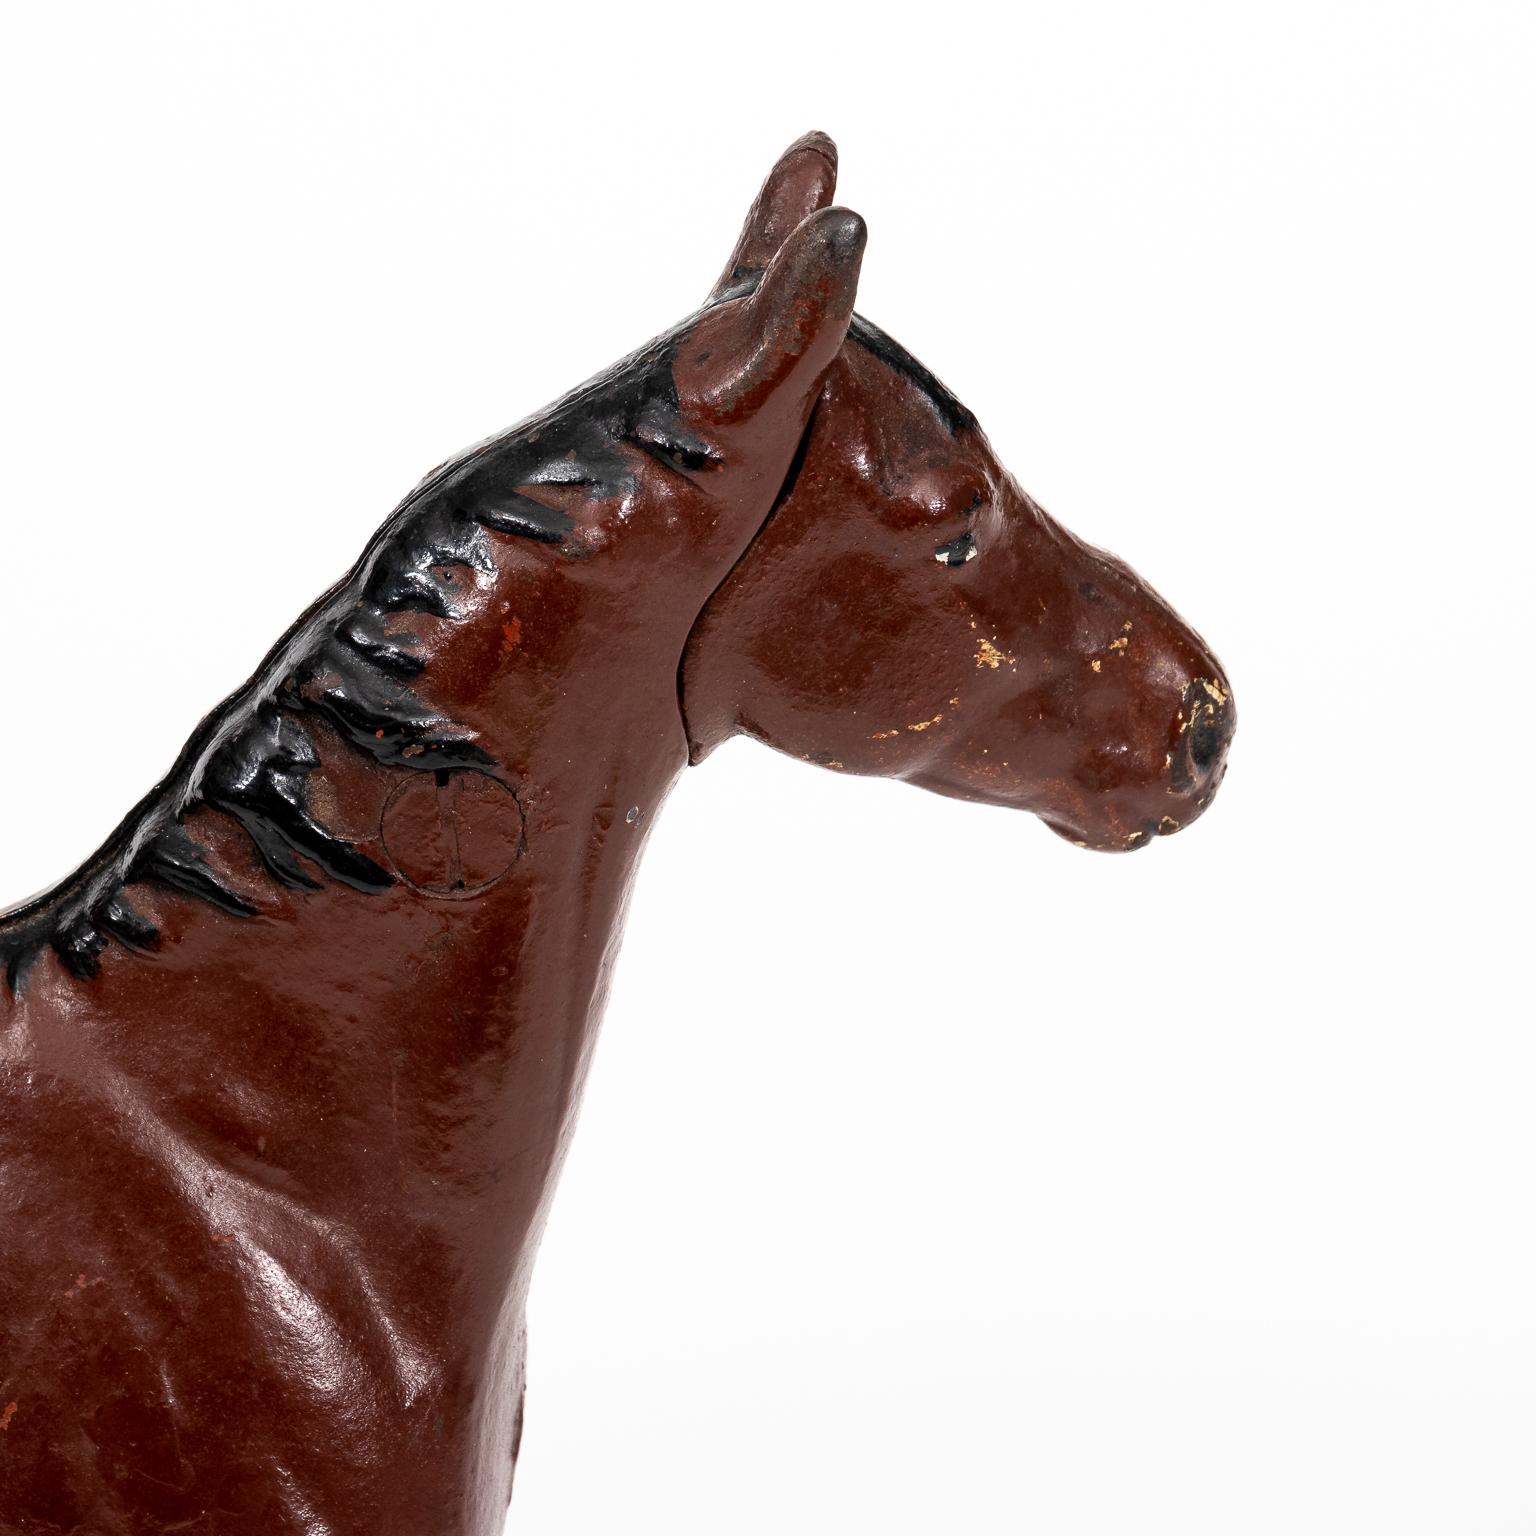 Antique large cast iron though bred horse door stop by the Hubley Manufacturing Company in Lancaster, PA, circa 1940s. This piece is 10.00 inches tall and 11.50 inches long. Made in the United States. Please note of wear consistent with age